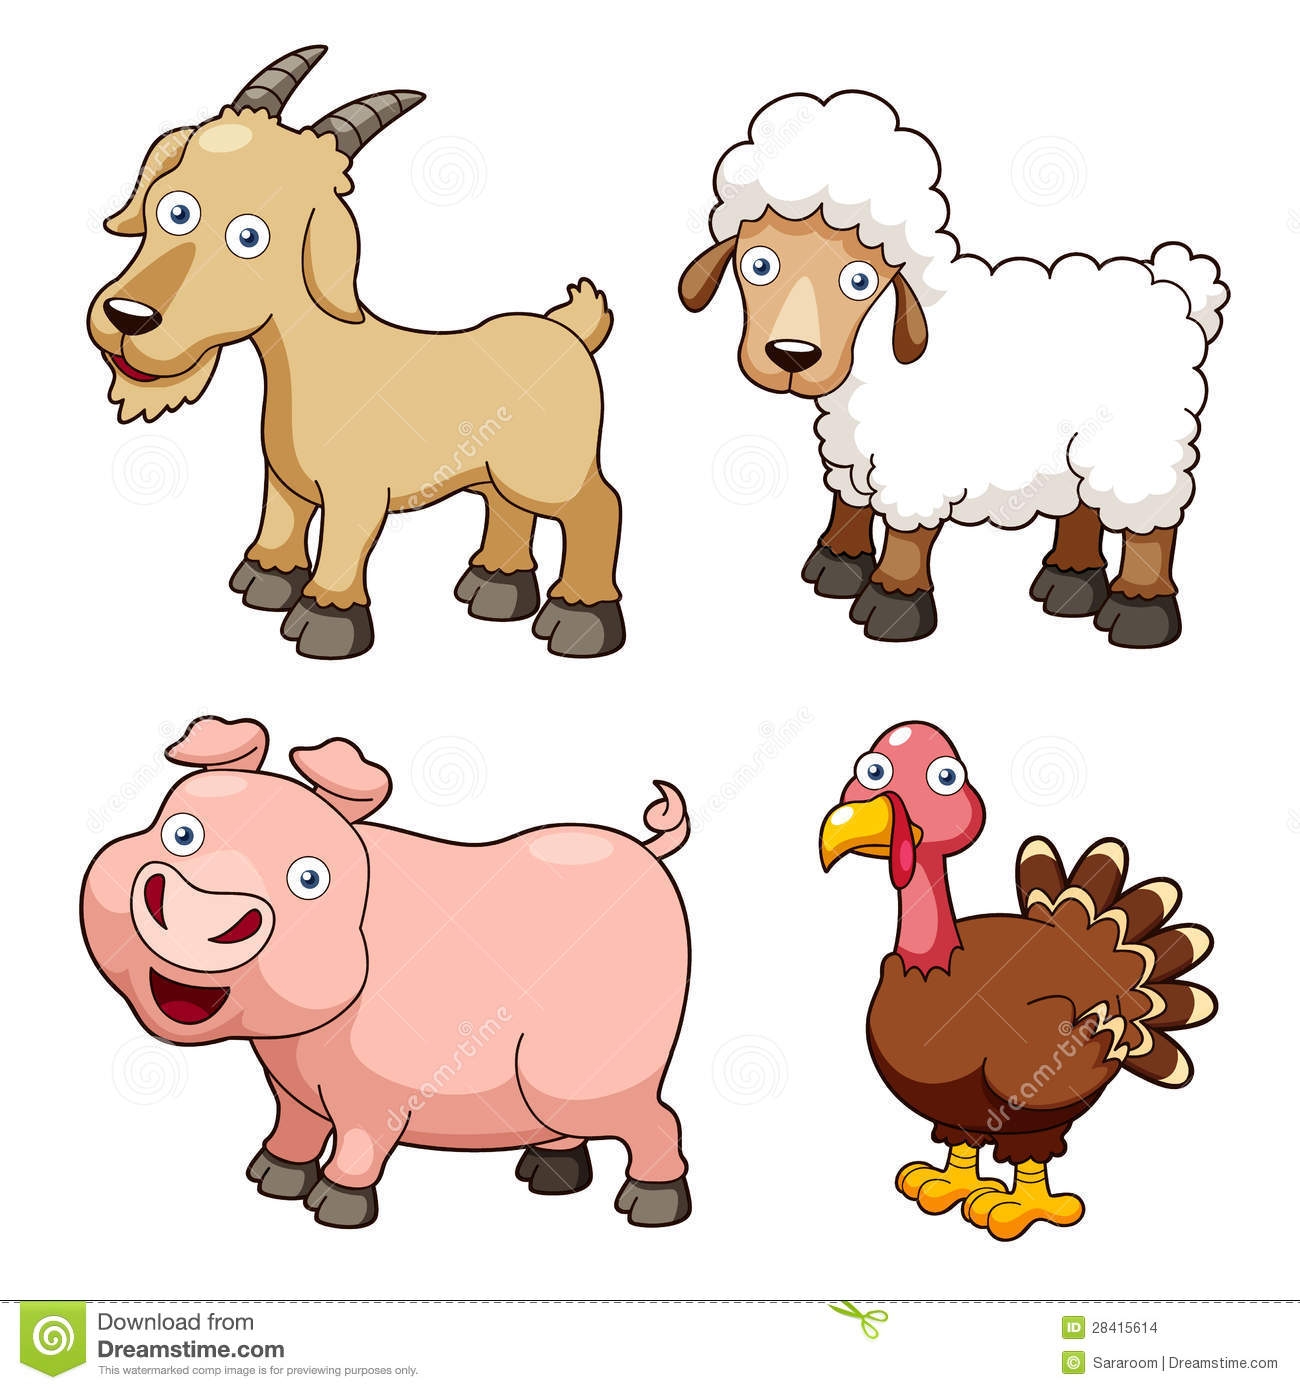 Farm Animals clipart #4, Download drawings